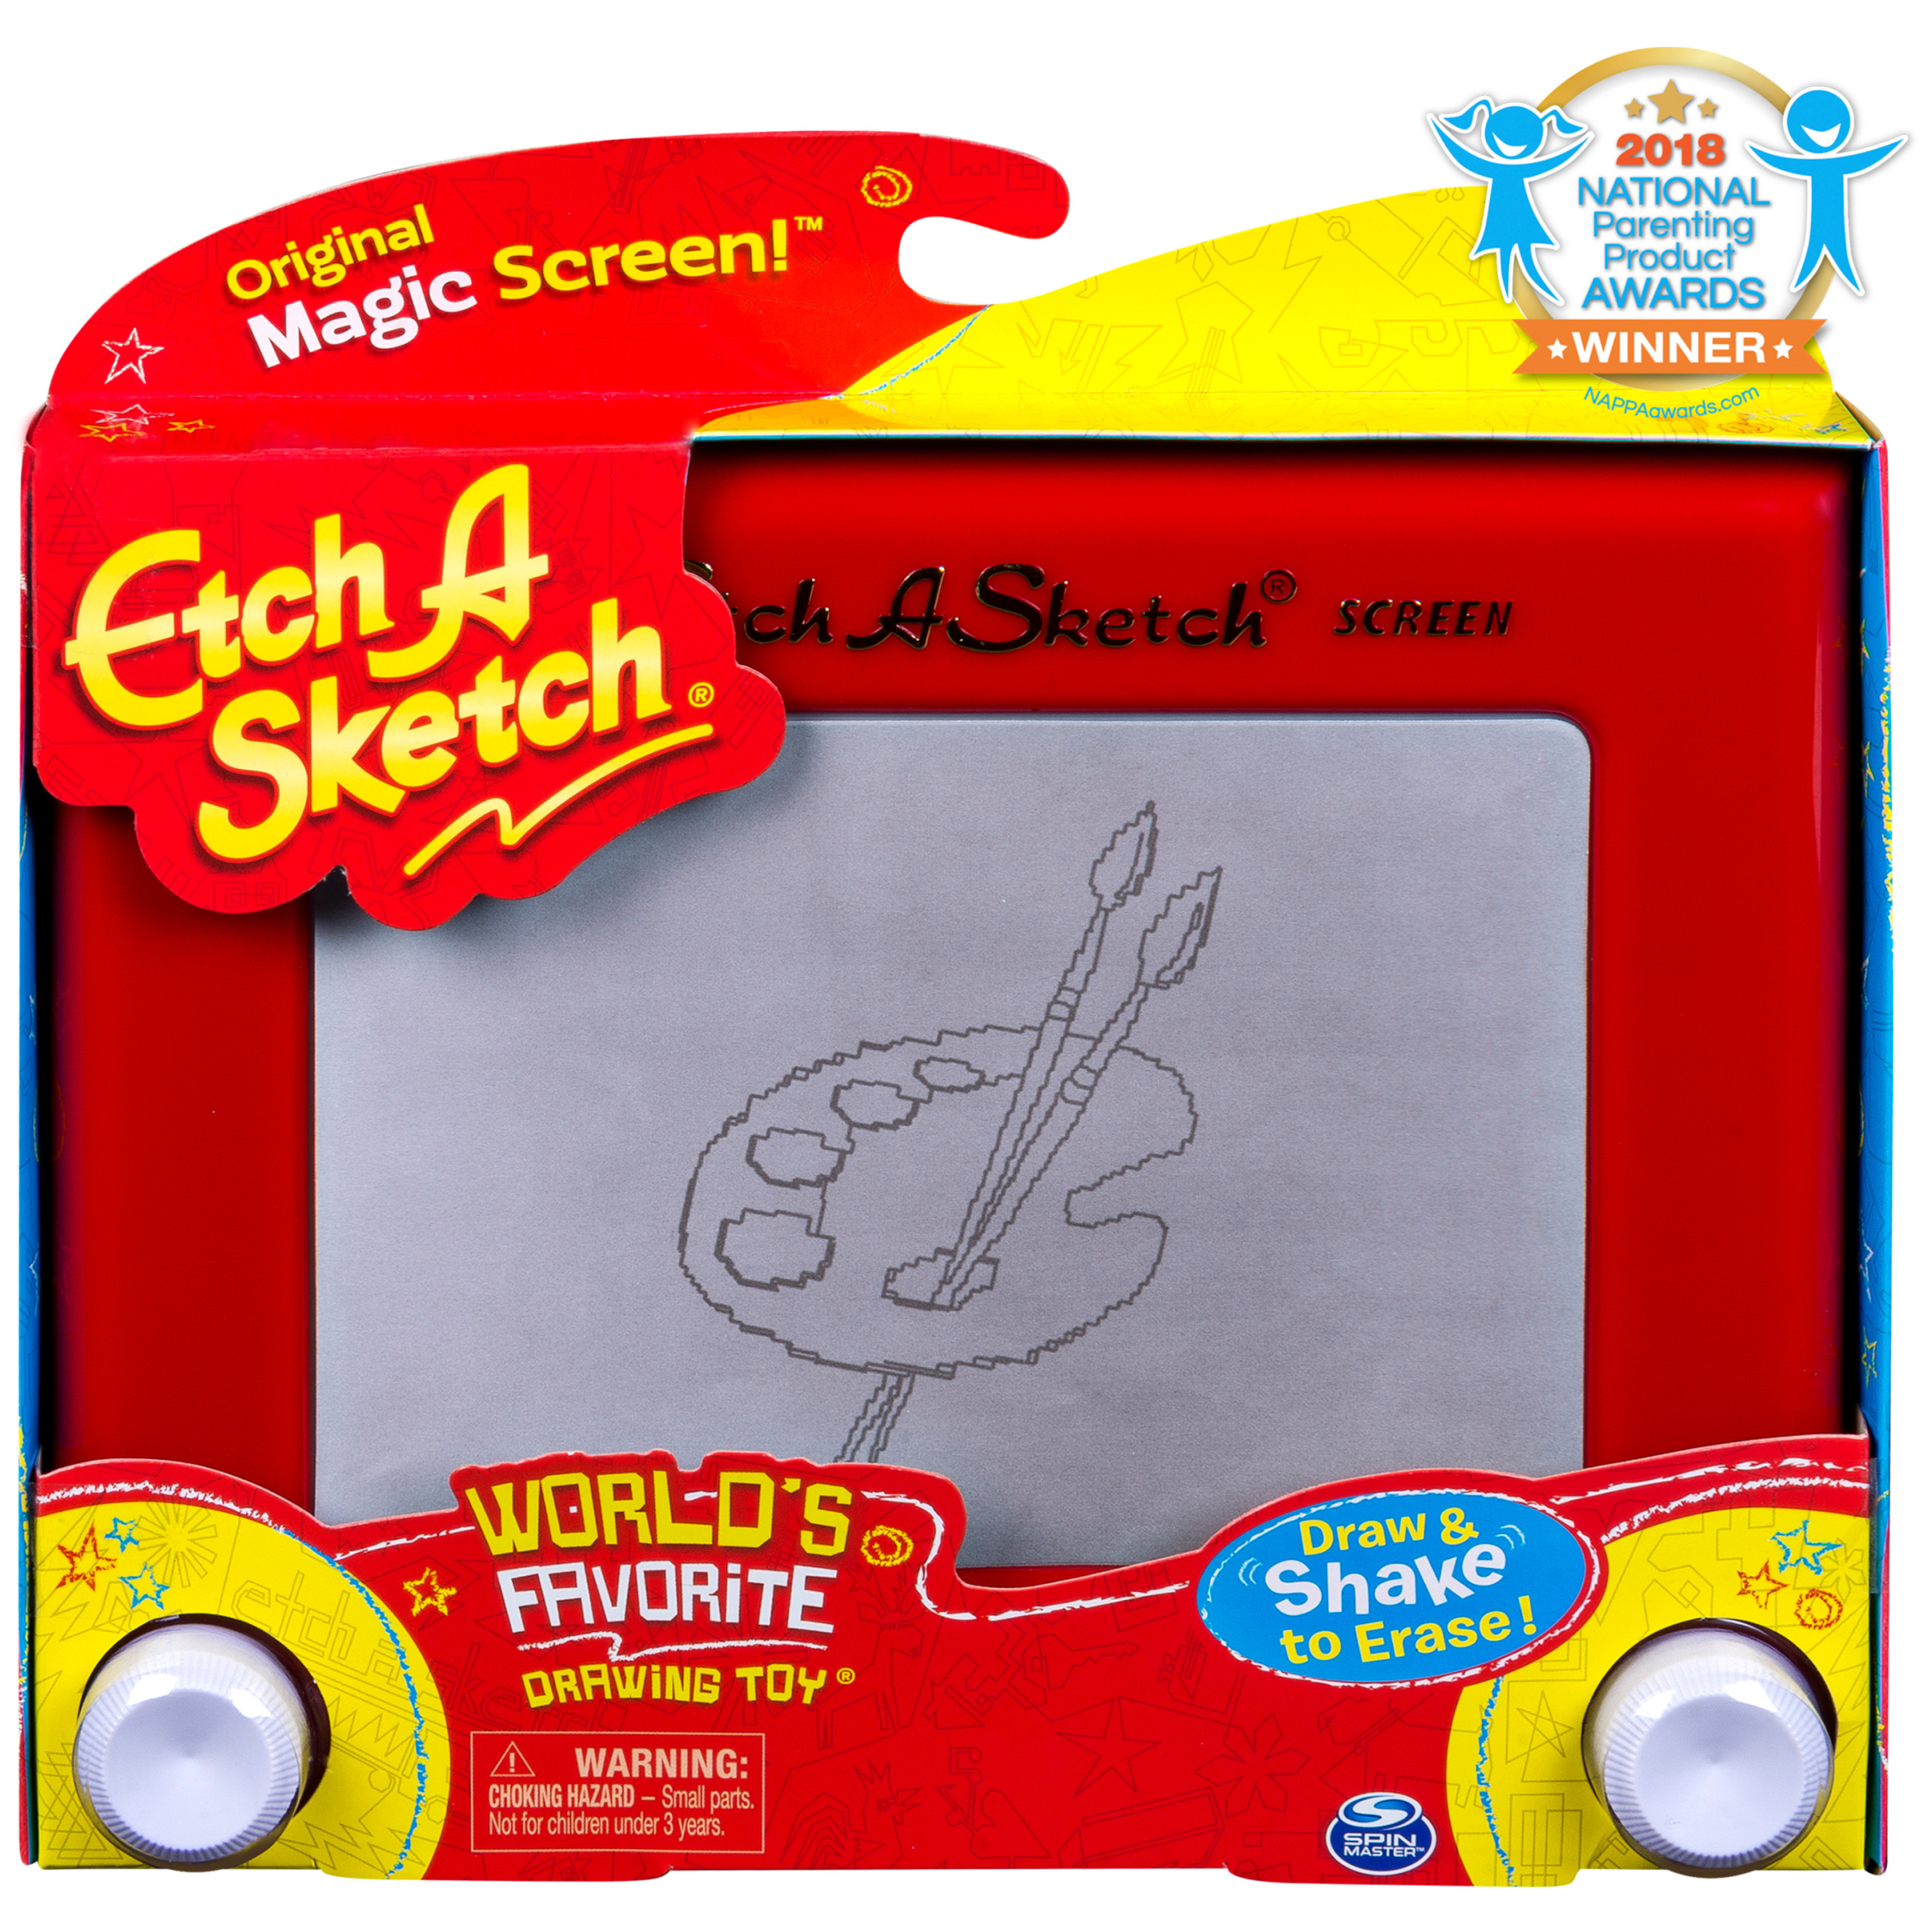 Etch A Sketch, Classic Red Drawing Toy with Magic Screen, for Ages 3 and Up - image 1 of 6